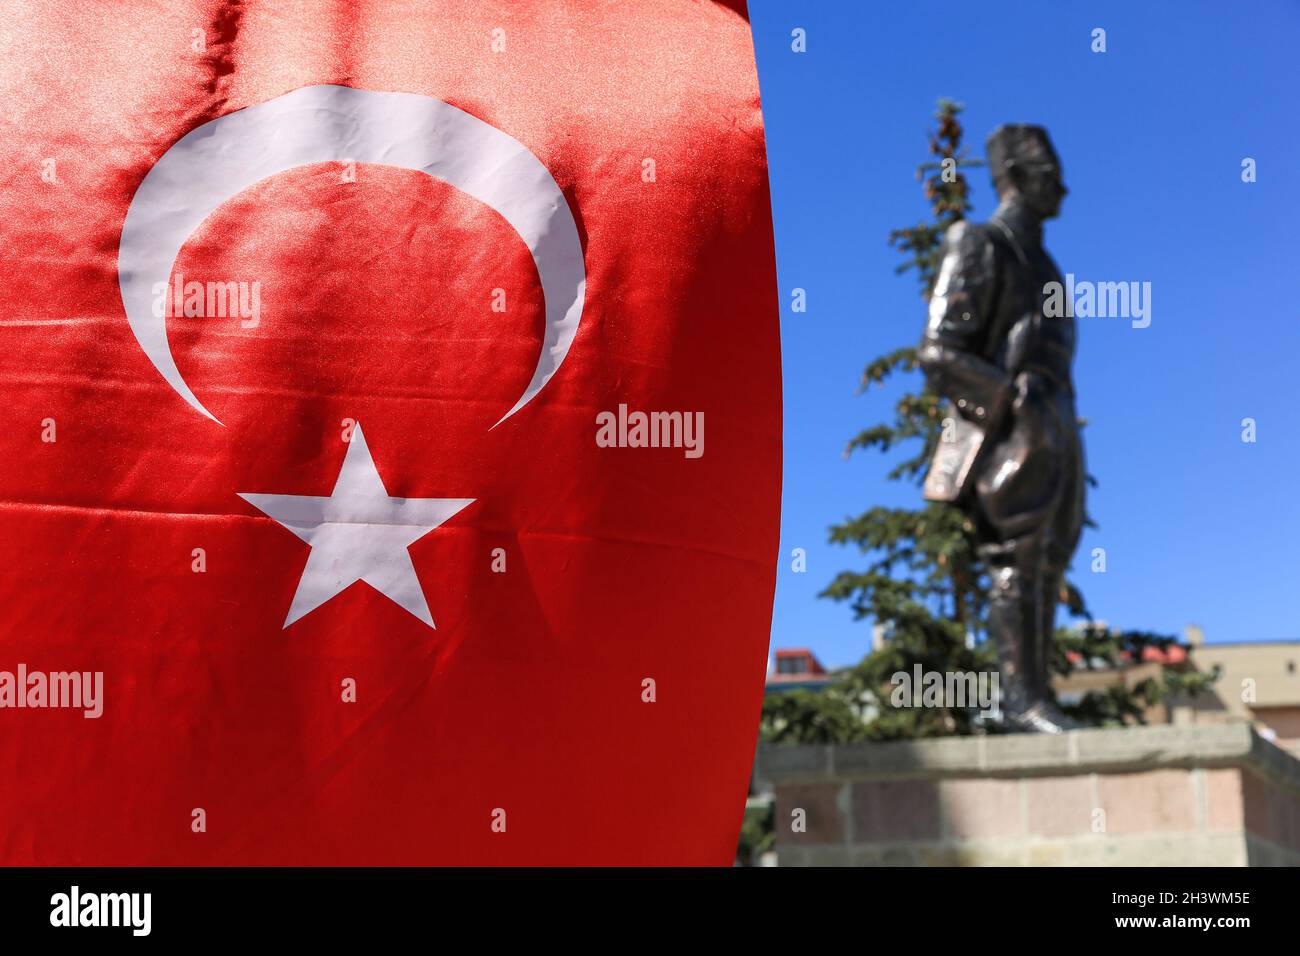 Turkish flag. Outside the clear depth of field, there is the statue of Mustafa Kemal Atatürk. Stock Photo